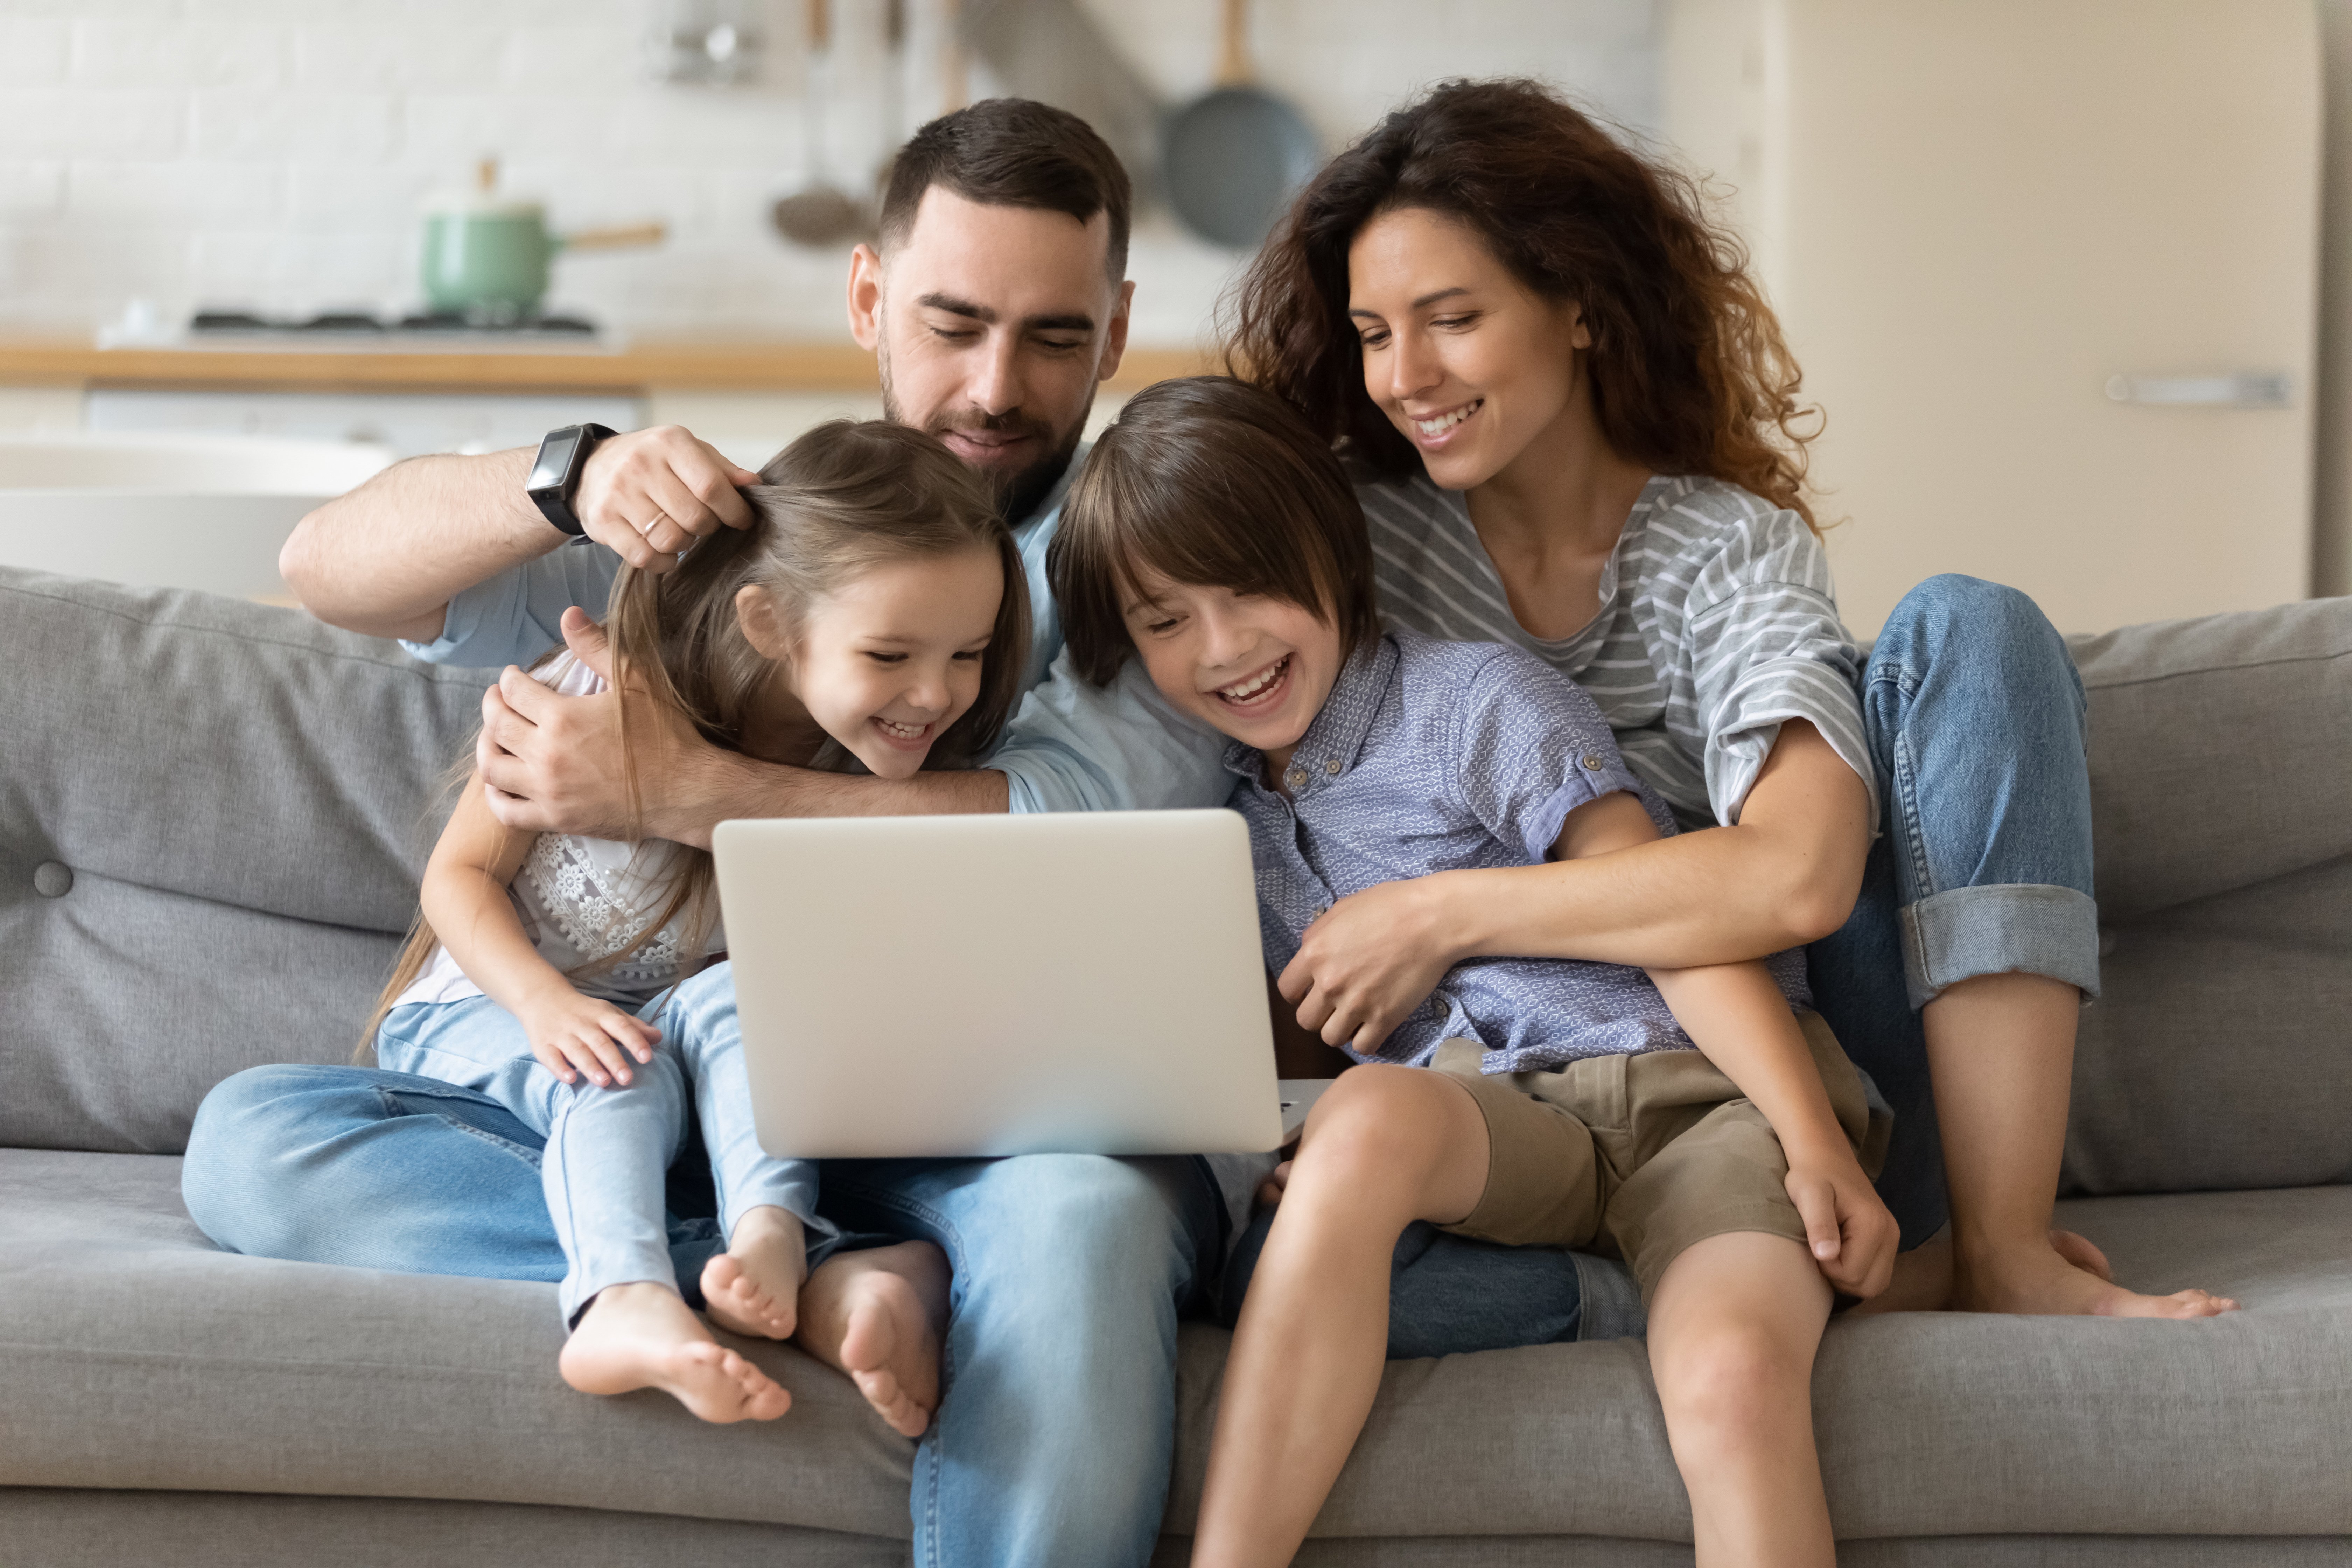 HAPPY FAMILY WATCHING SOMETHING ON A LAPTOP